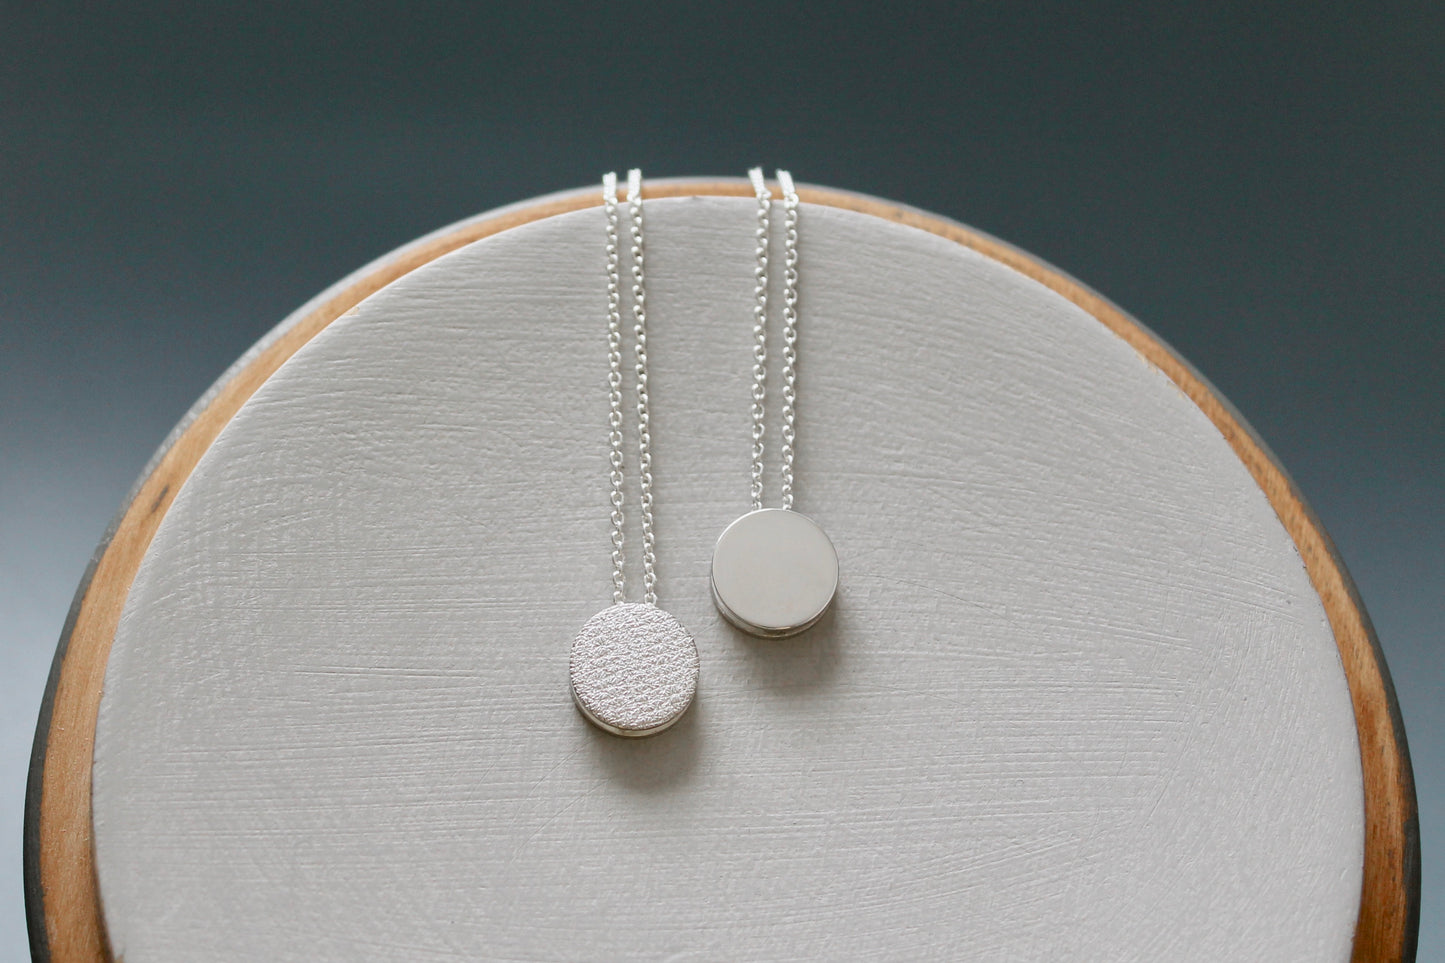 tiny round necklace in sterling silver with textured surface